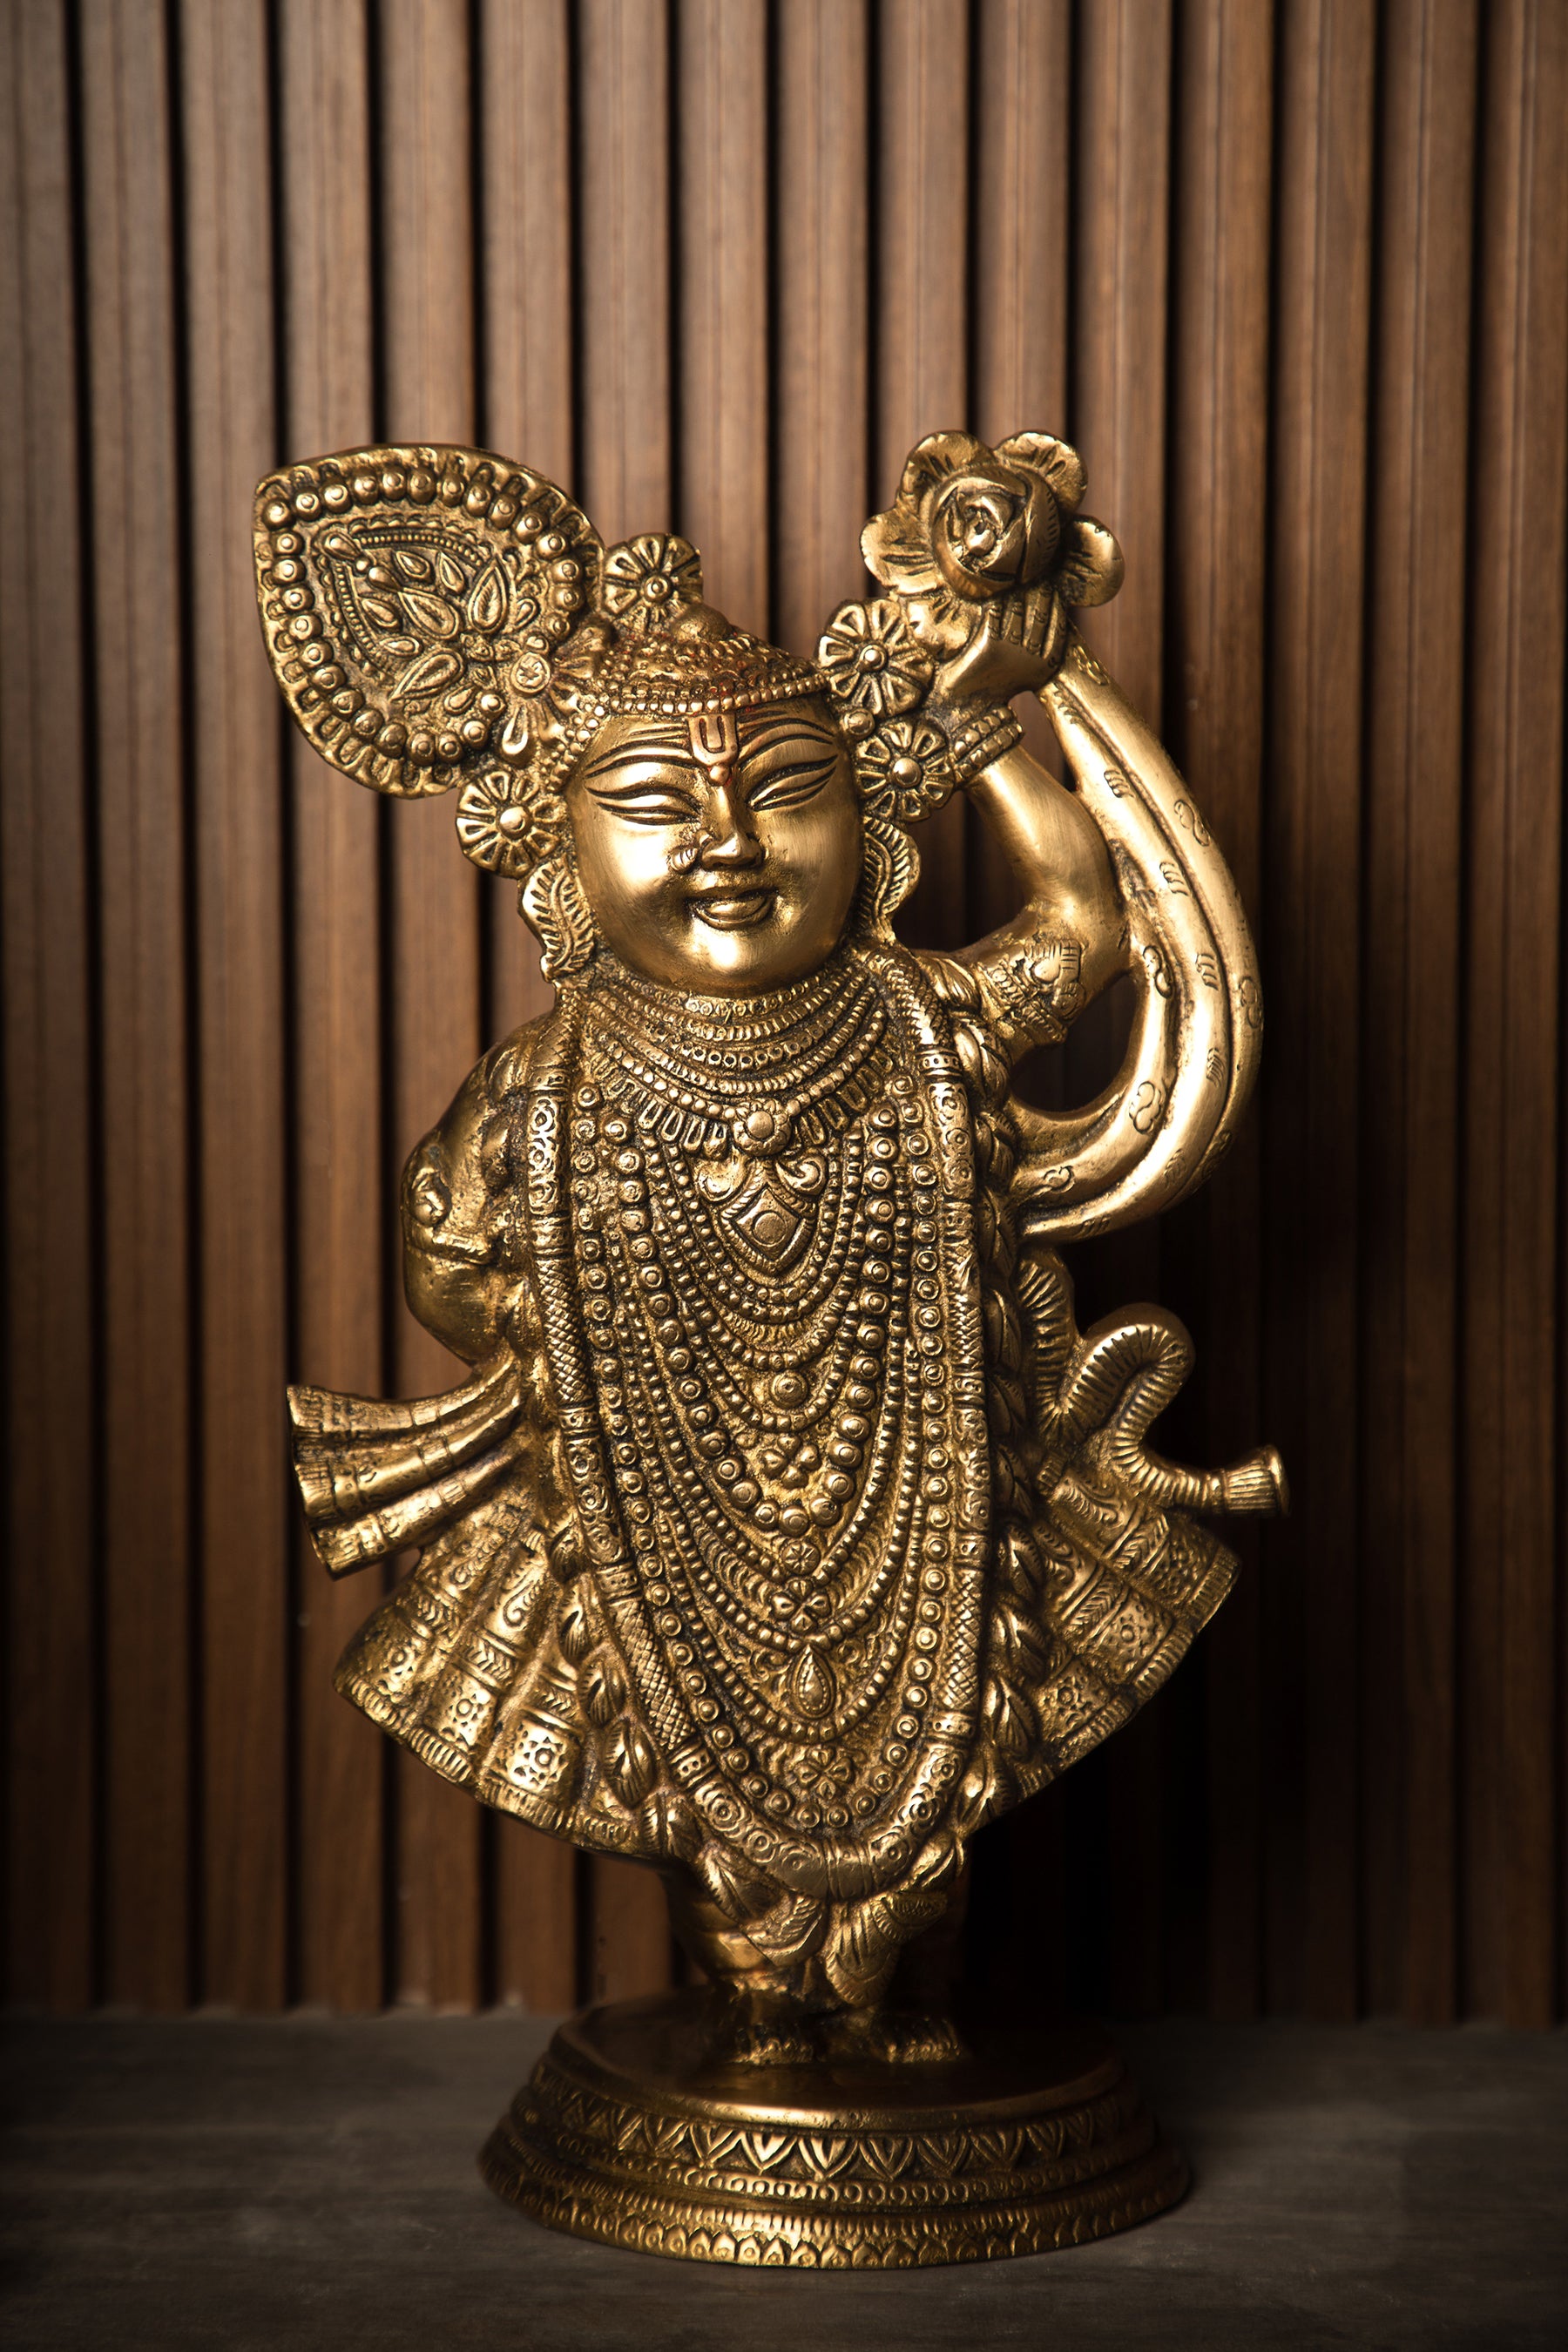 Our Brass Shreenath Ji Statue captures His serene and compassionate form, making it a source of divine grace and inspiration.